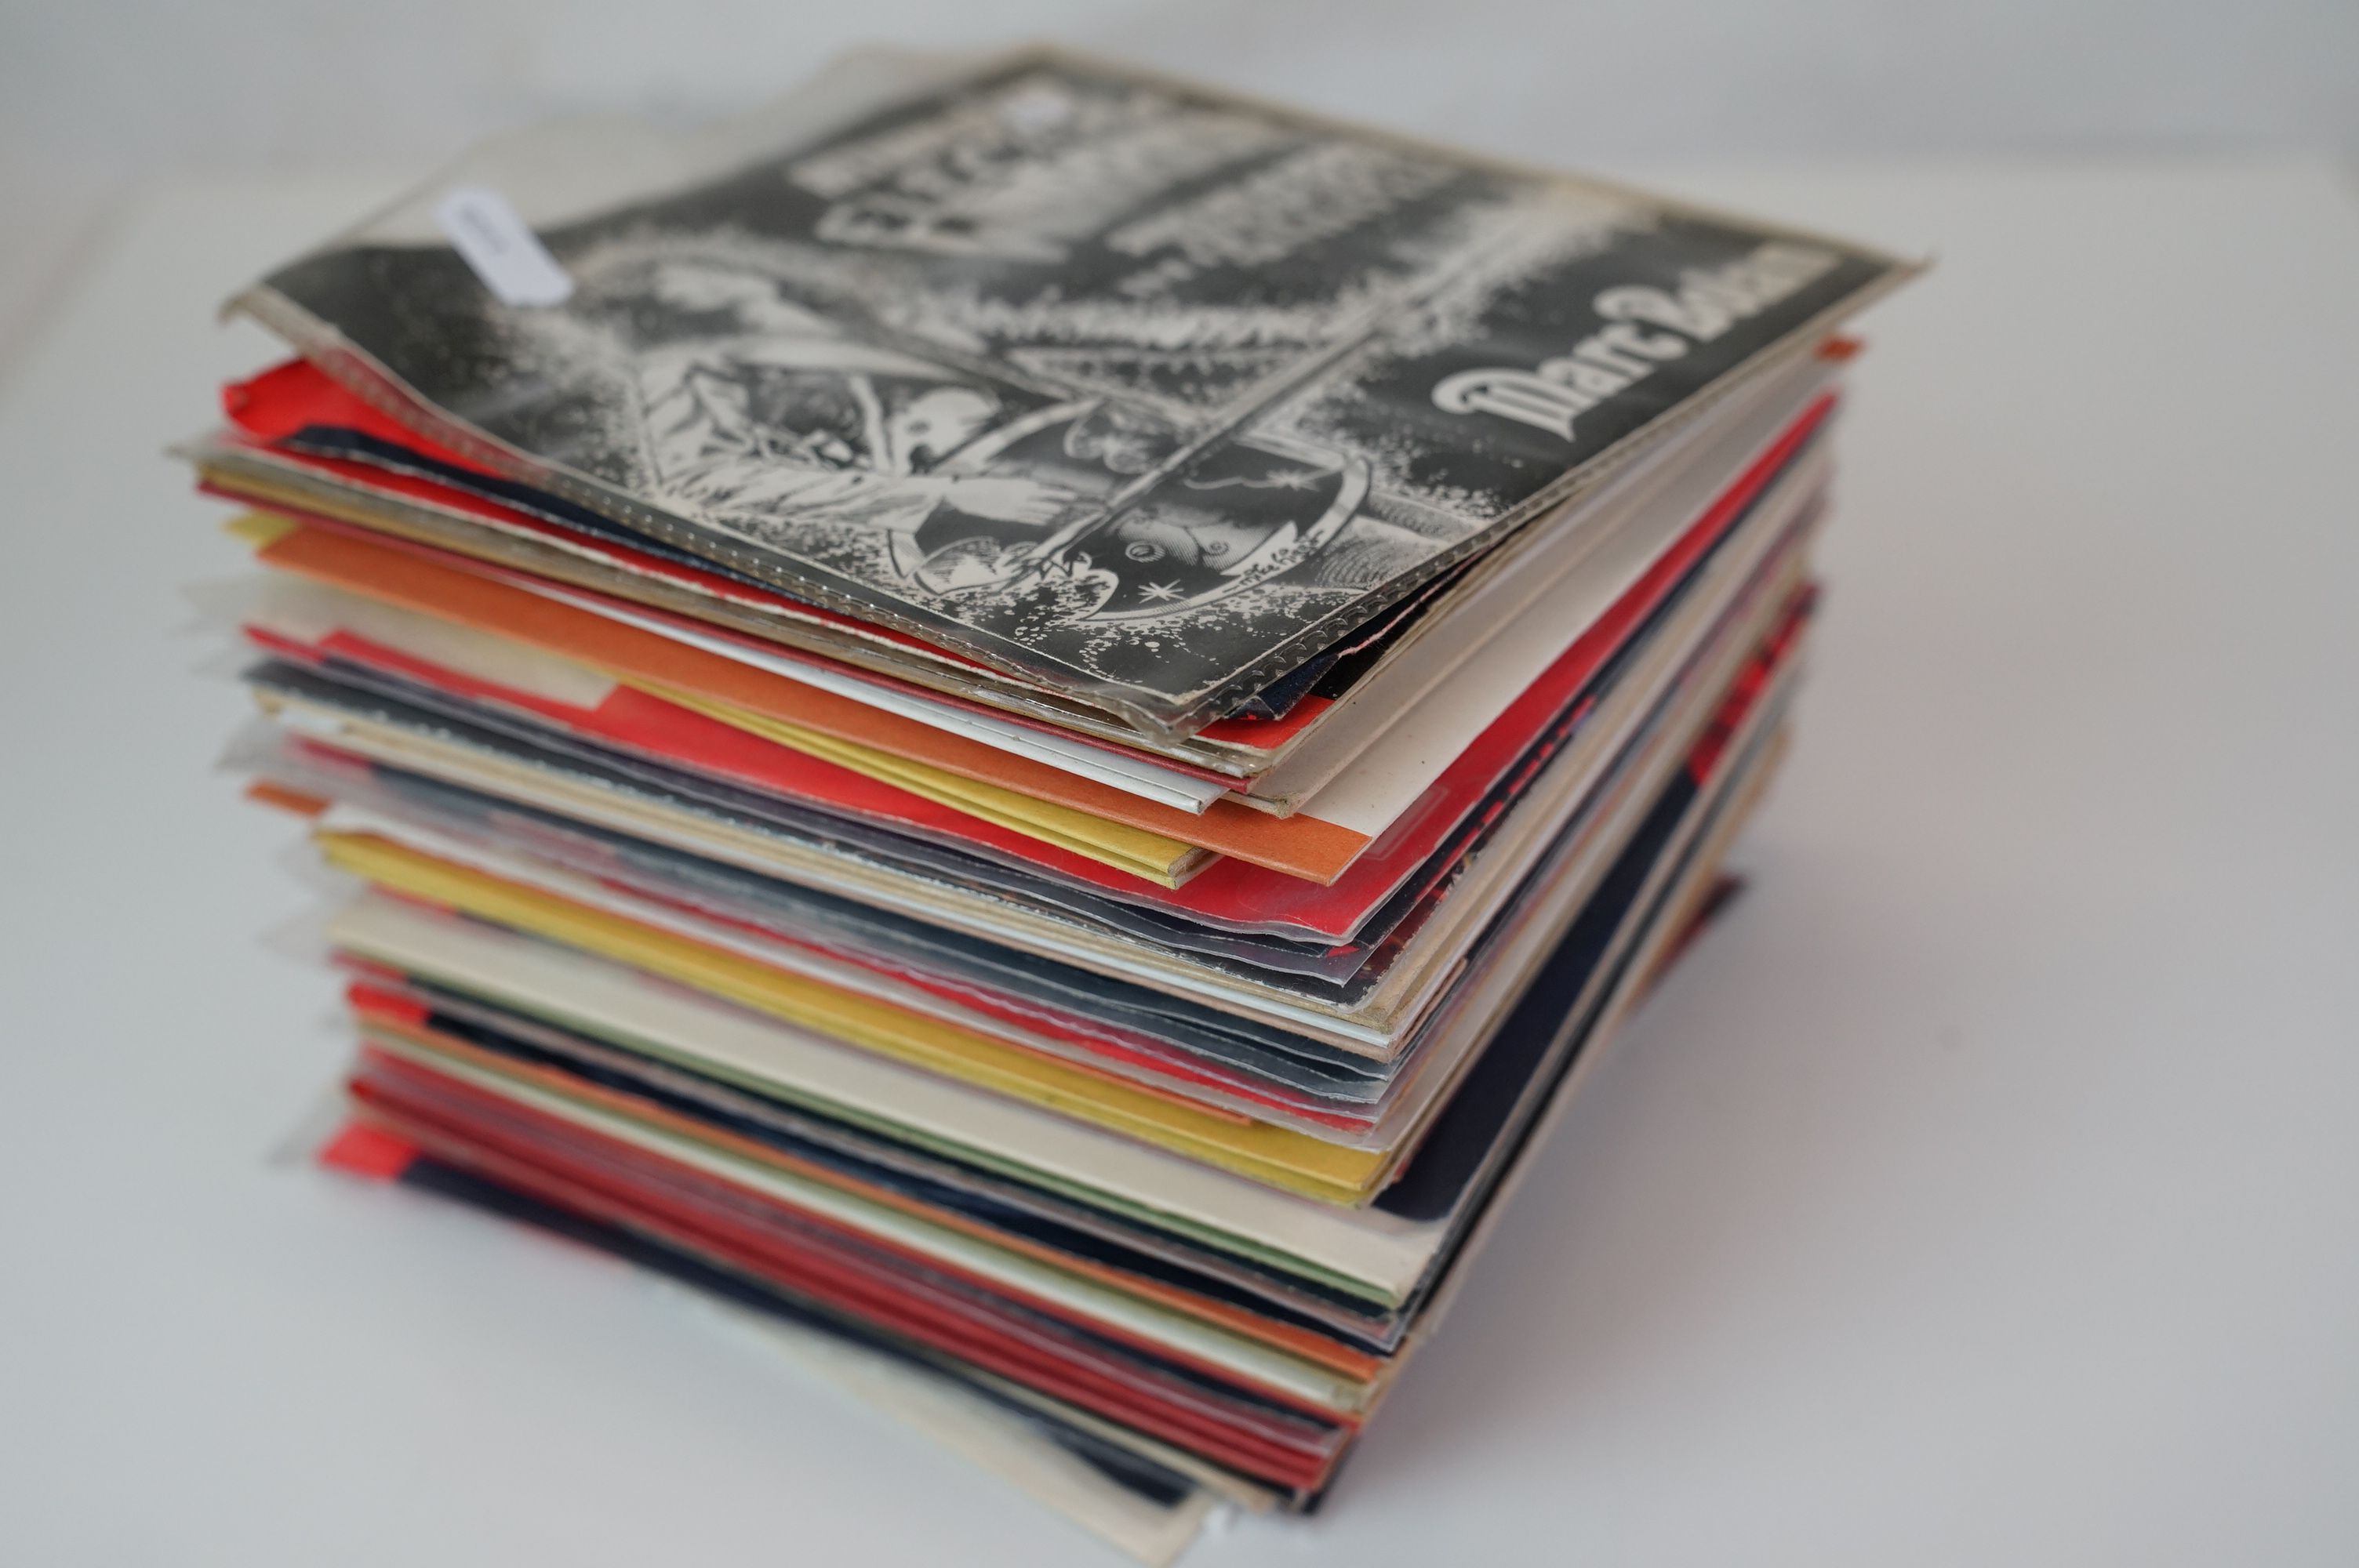 Vinyl - Collection of 50 T Rex and Marc Bolan 45s, some in sleeves, some without, condition varies - Image 3 of 3